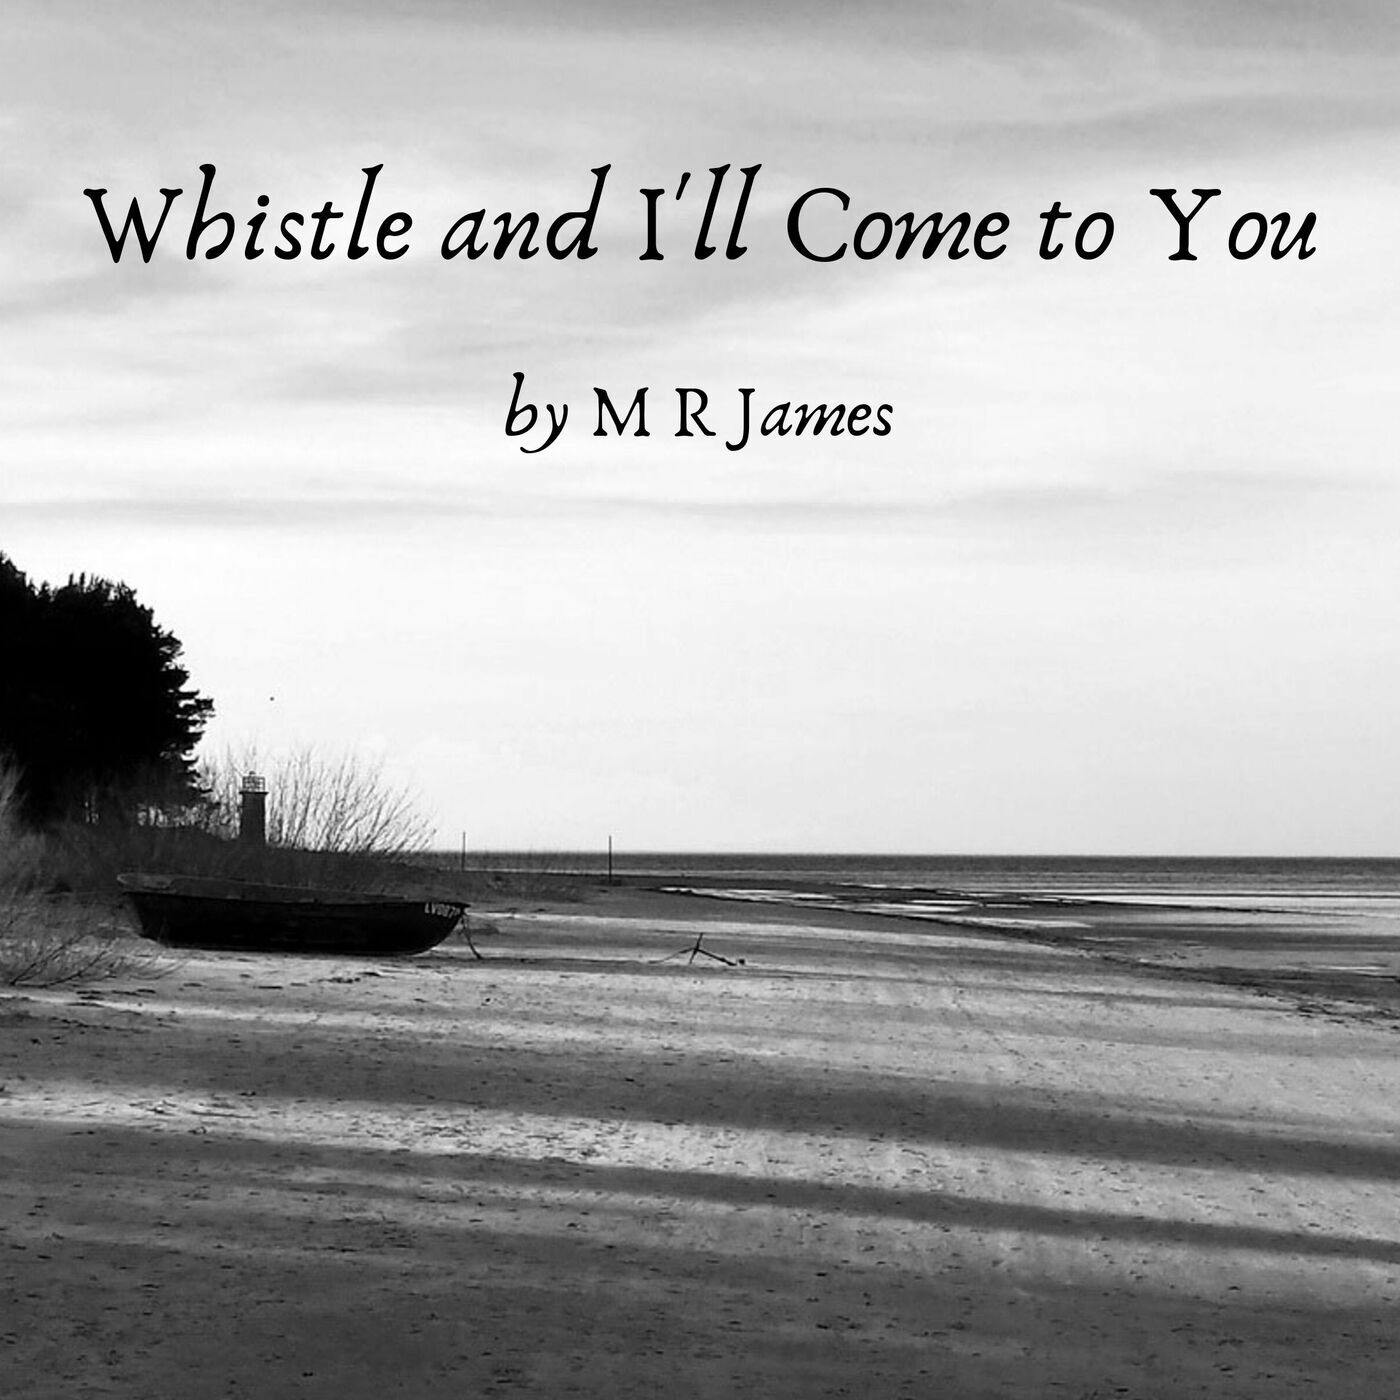 Episode 3: Whistle and I’ll Come to You by M R James